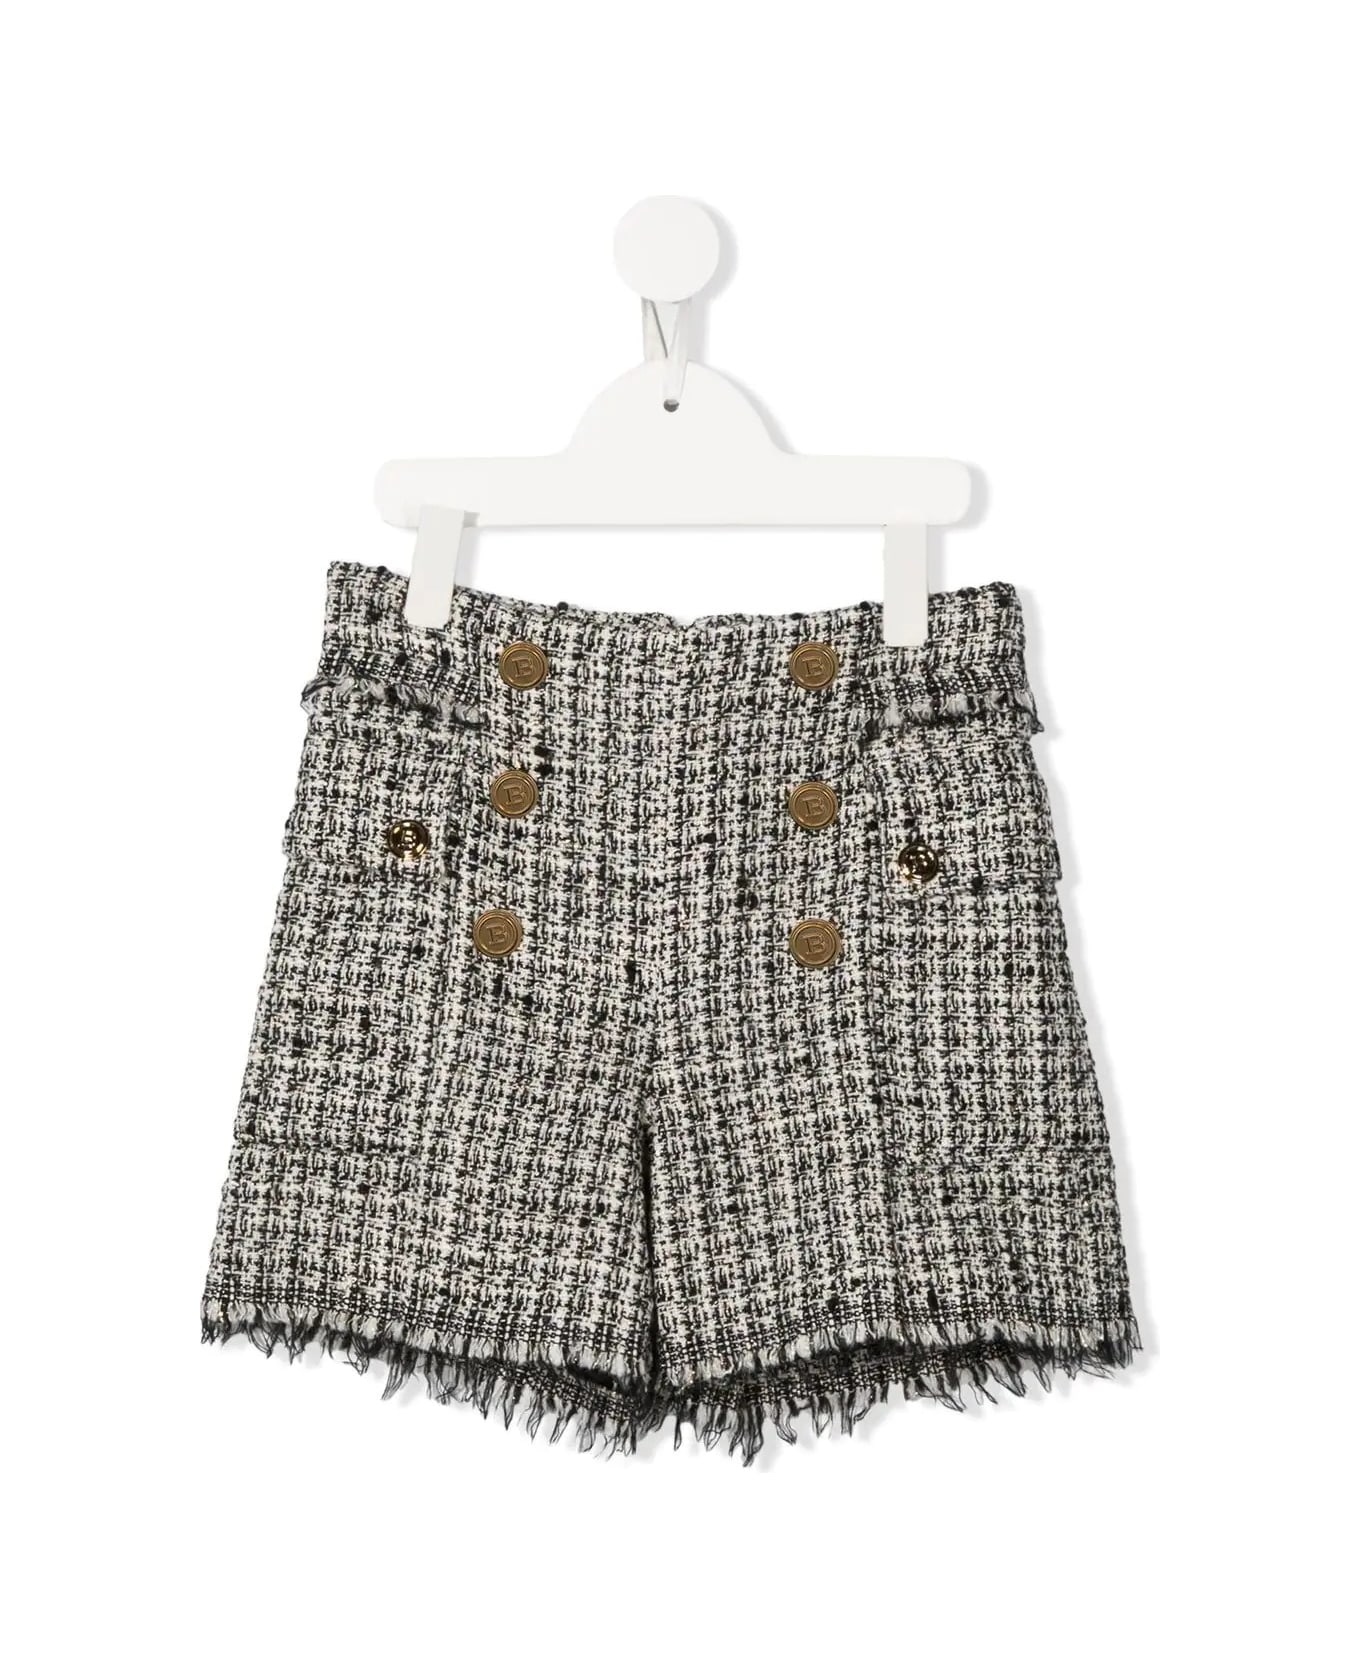 Balmain Black And Ivory Tweed Shorts With Buttons - Nero/avorio